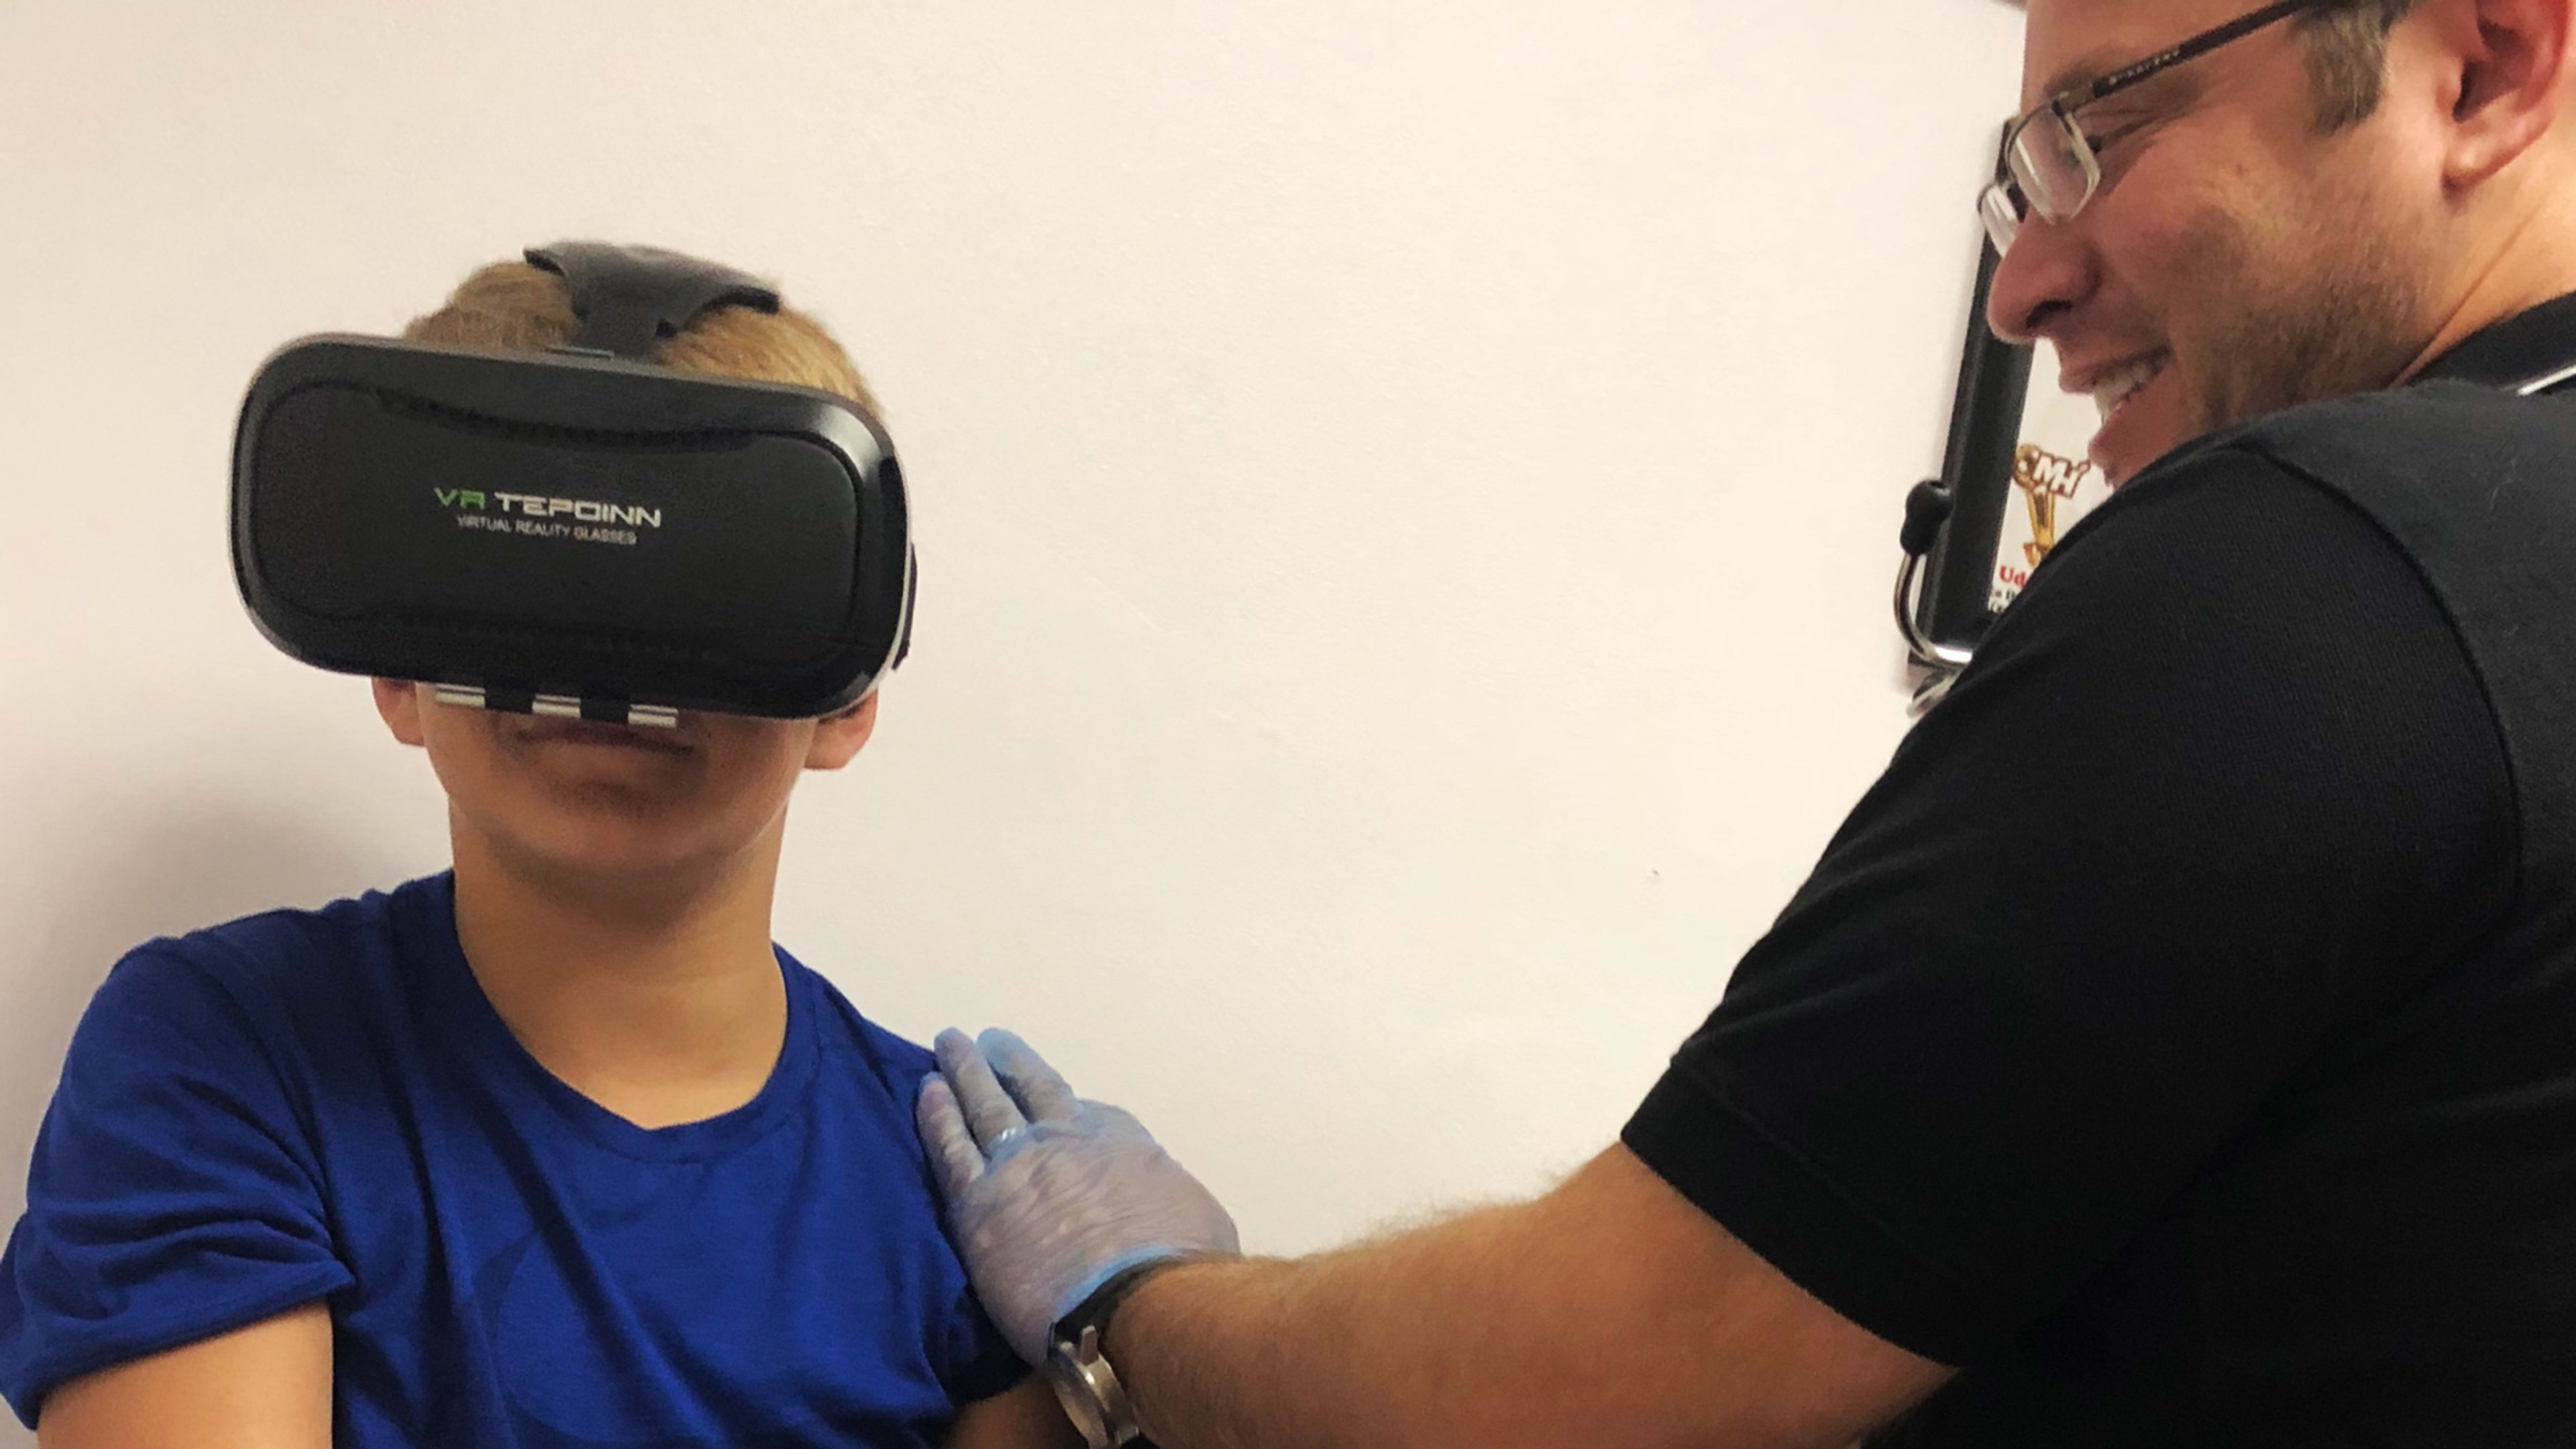 VR might be able to help kids get over their fear of needles